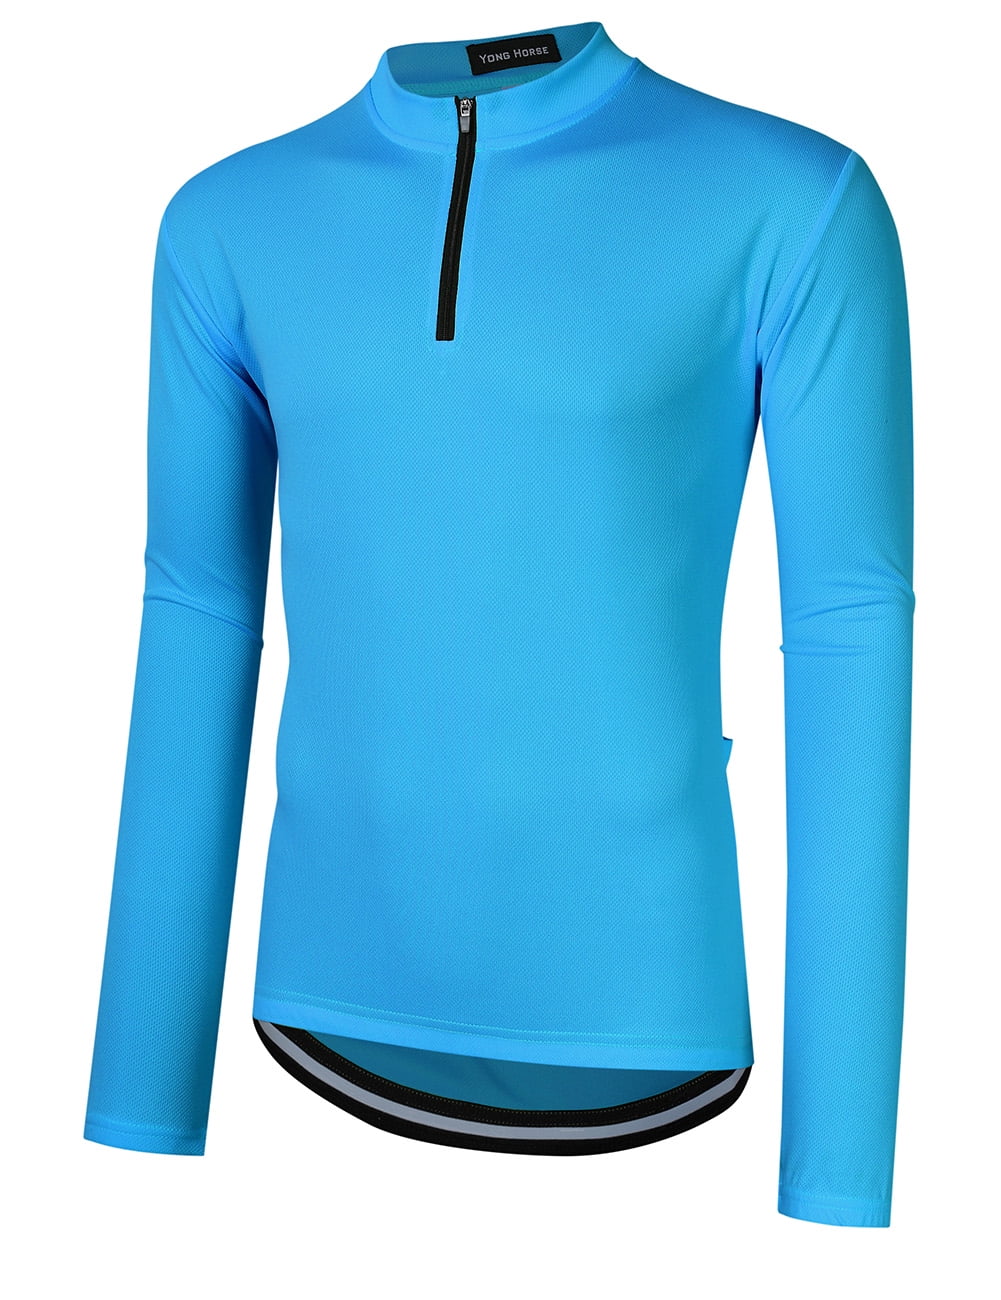 Details about   Bike Road Mens Cycling Jersey+Shorts Suit T-shirt Summer Top Clothing Breathable 